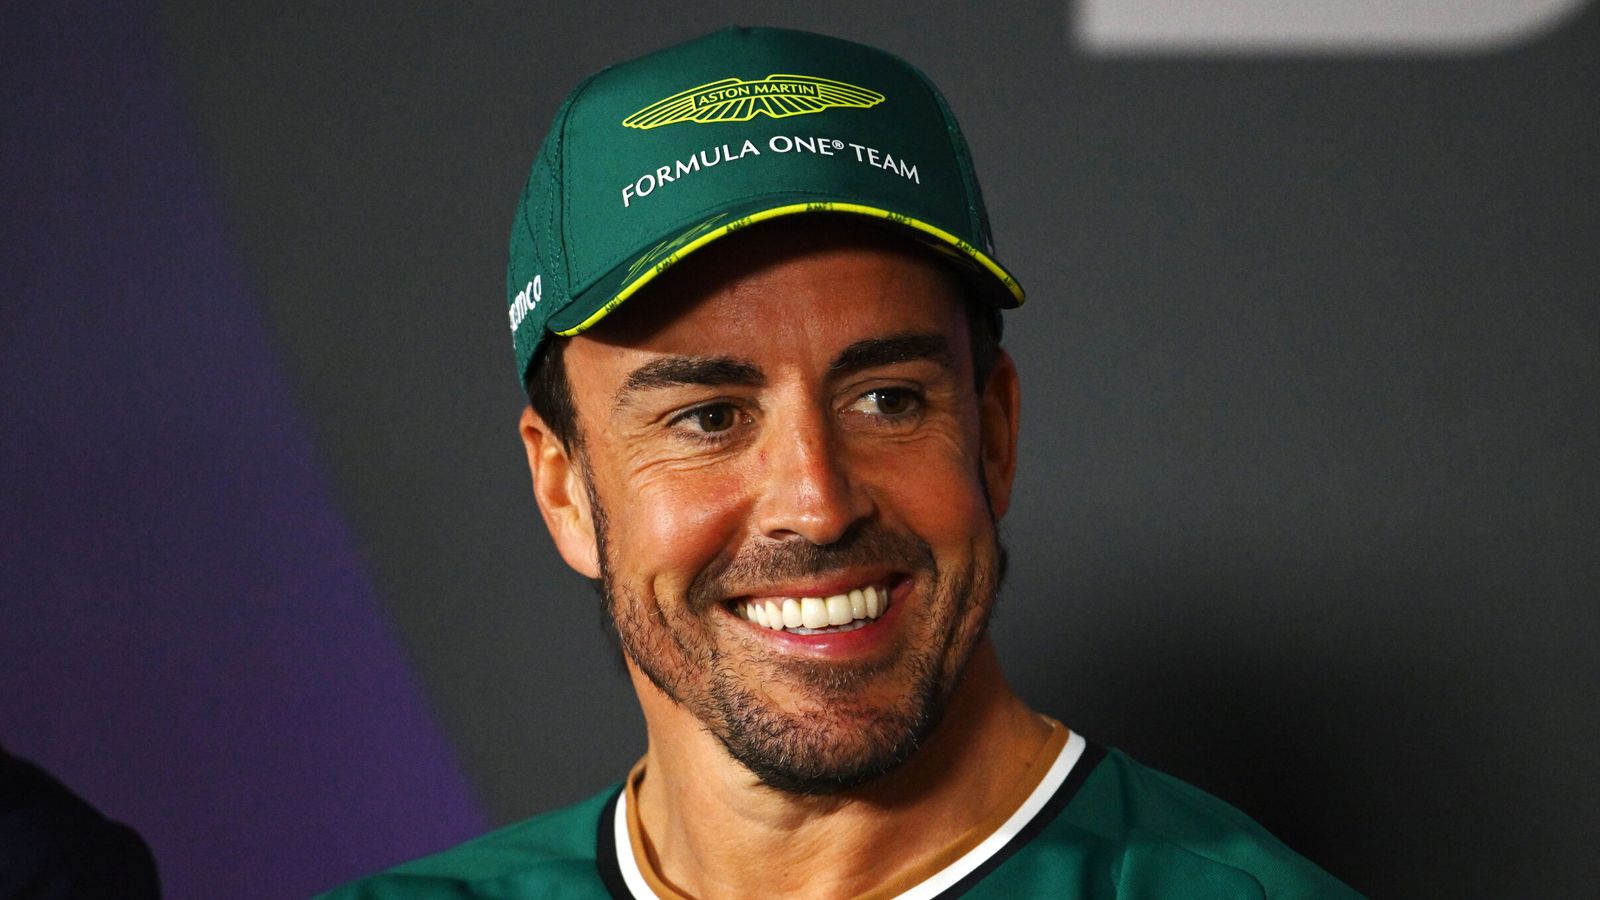 Fernando Alonso Signs Contract Extension with Aston Martin Racing Team, Commits to Stay Until 2026 | Latest Formula 1 Updates